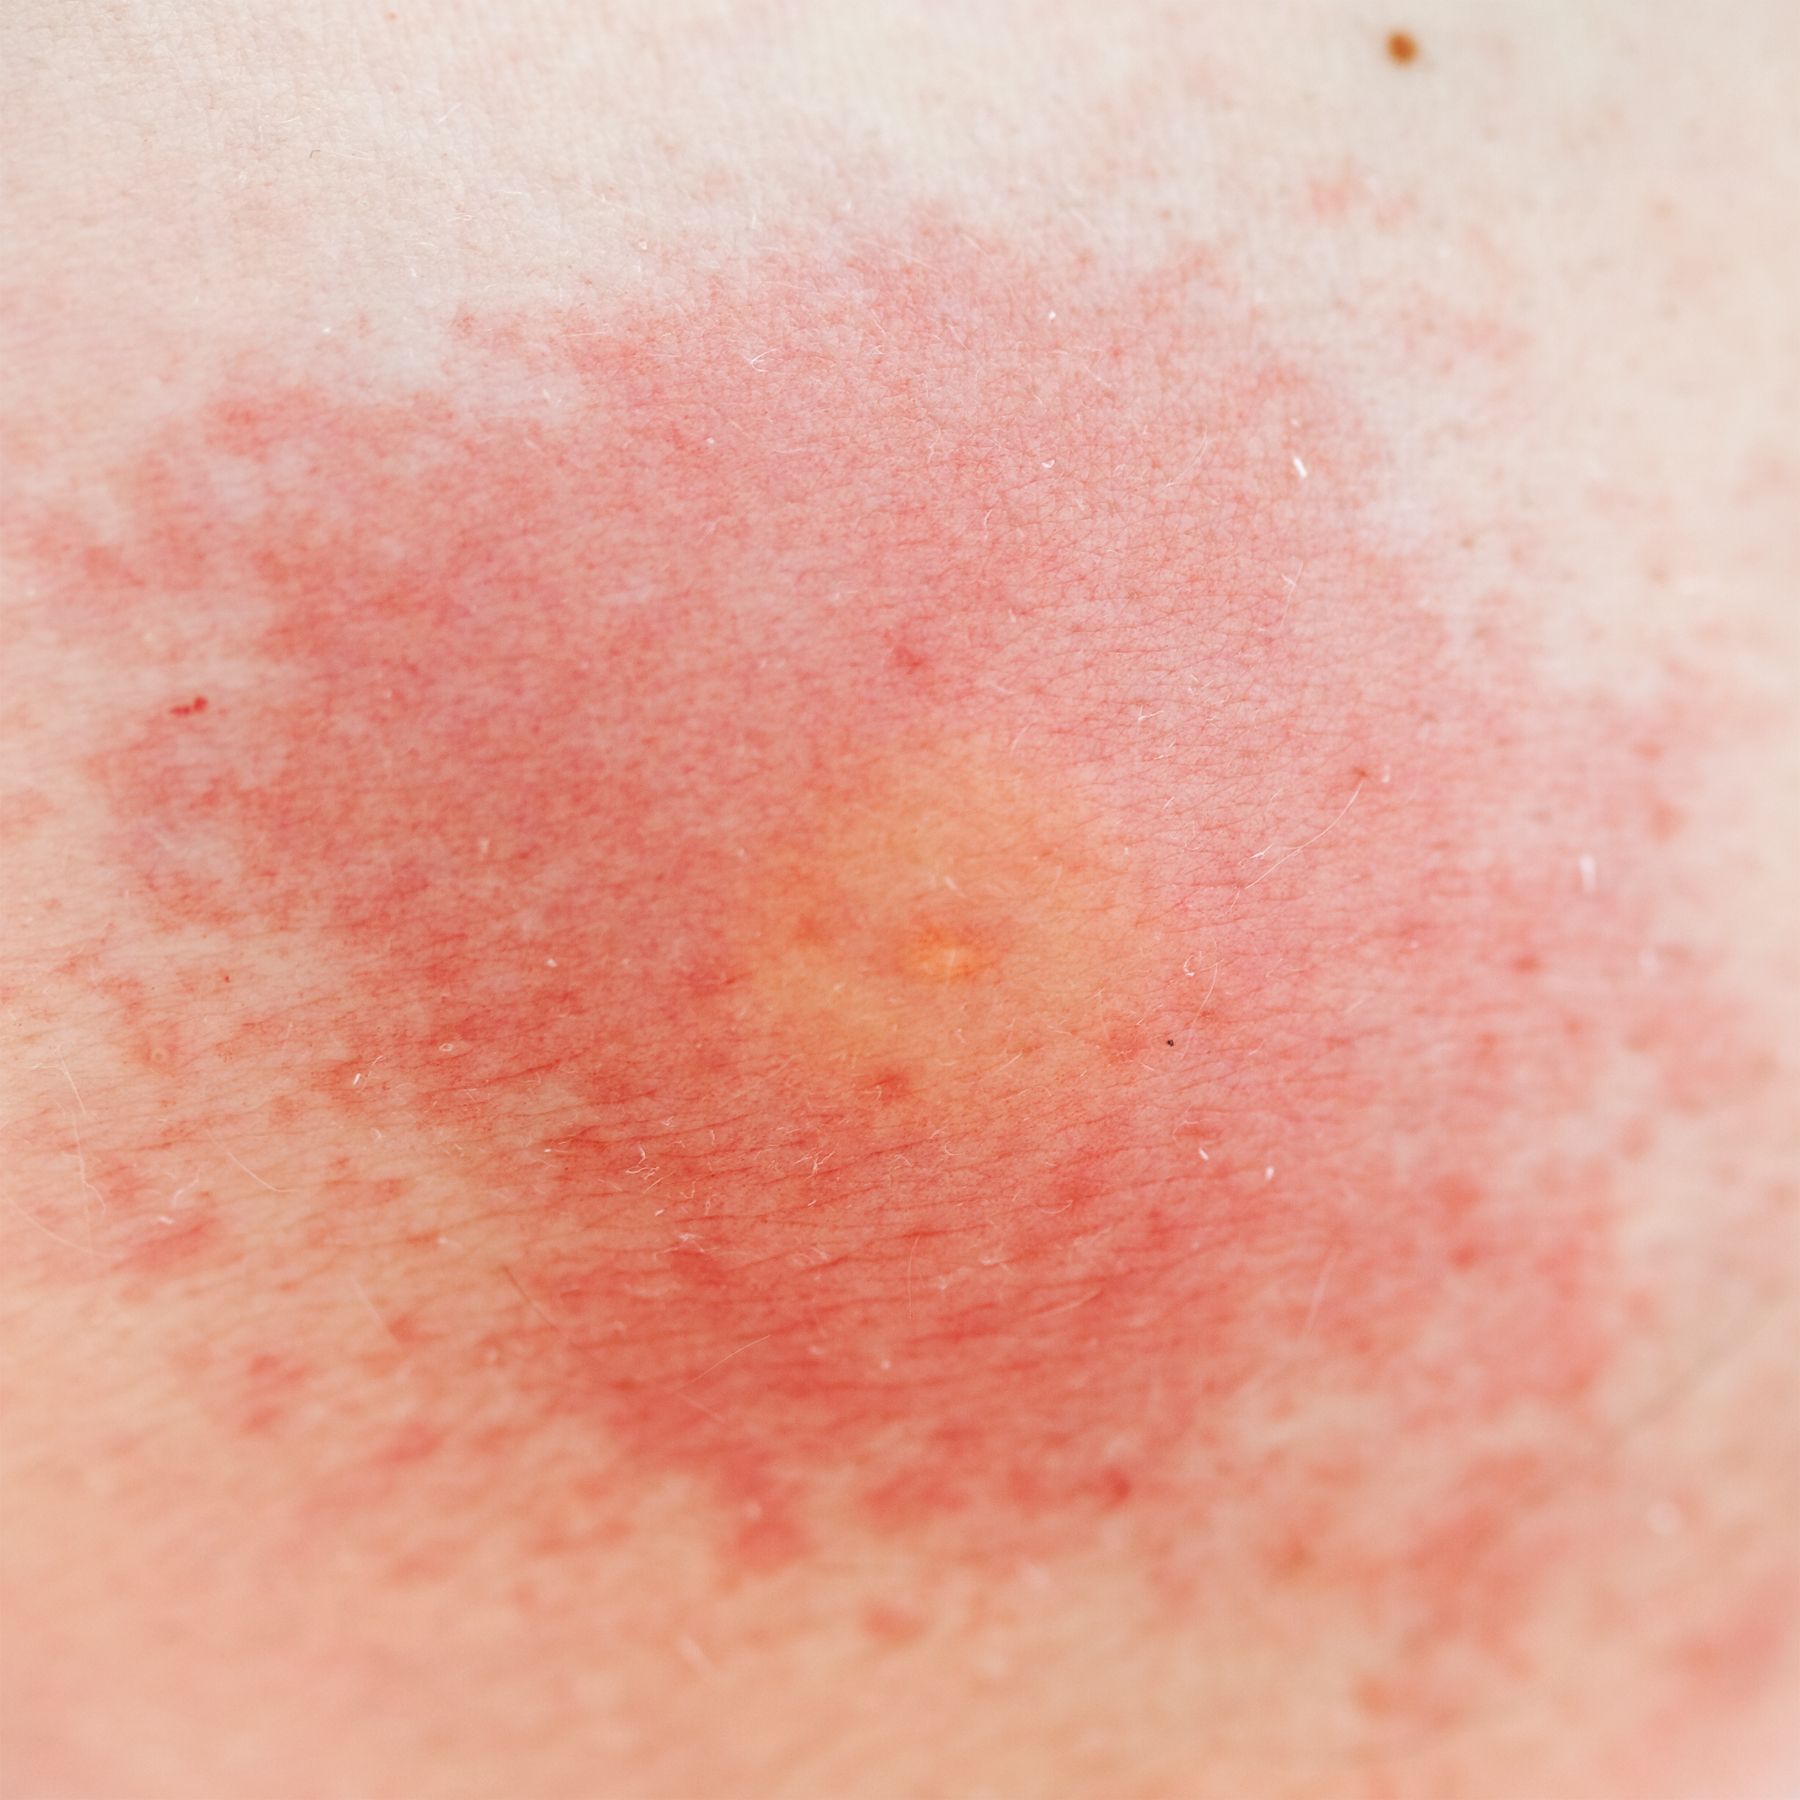 red rash from bug bite        <h3 class=